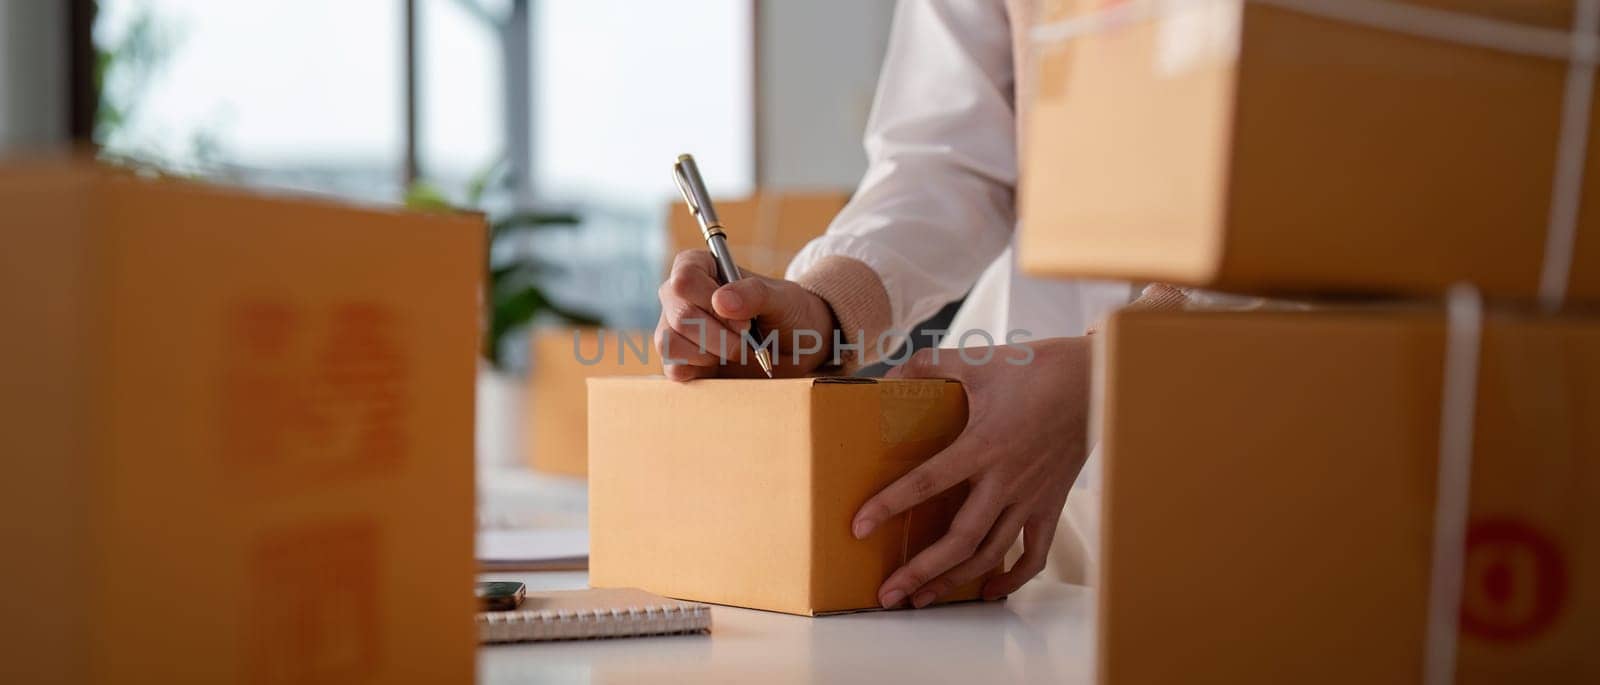 Woman entrepreneur prepare parcel box and check online order on laptop computer for commercial checking delivery. online marketing, packing box, SME seller. startup business concept by nateemee